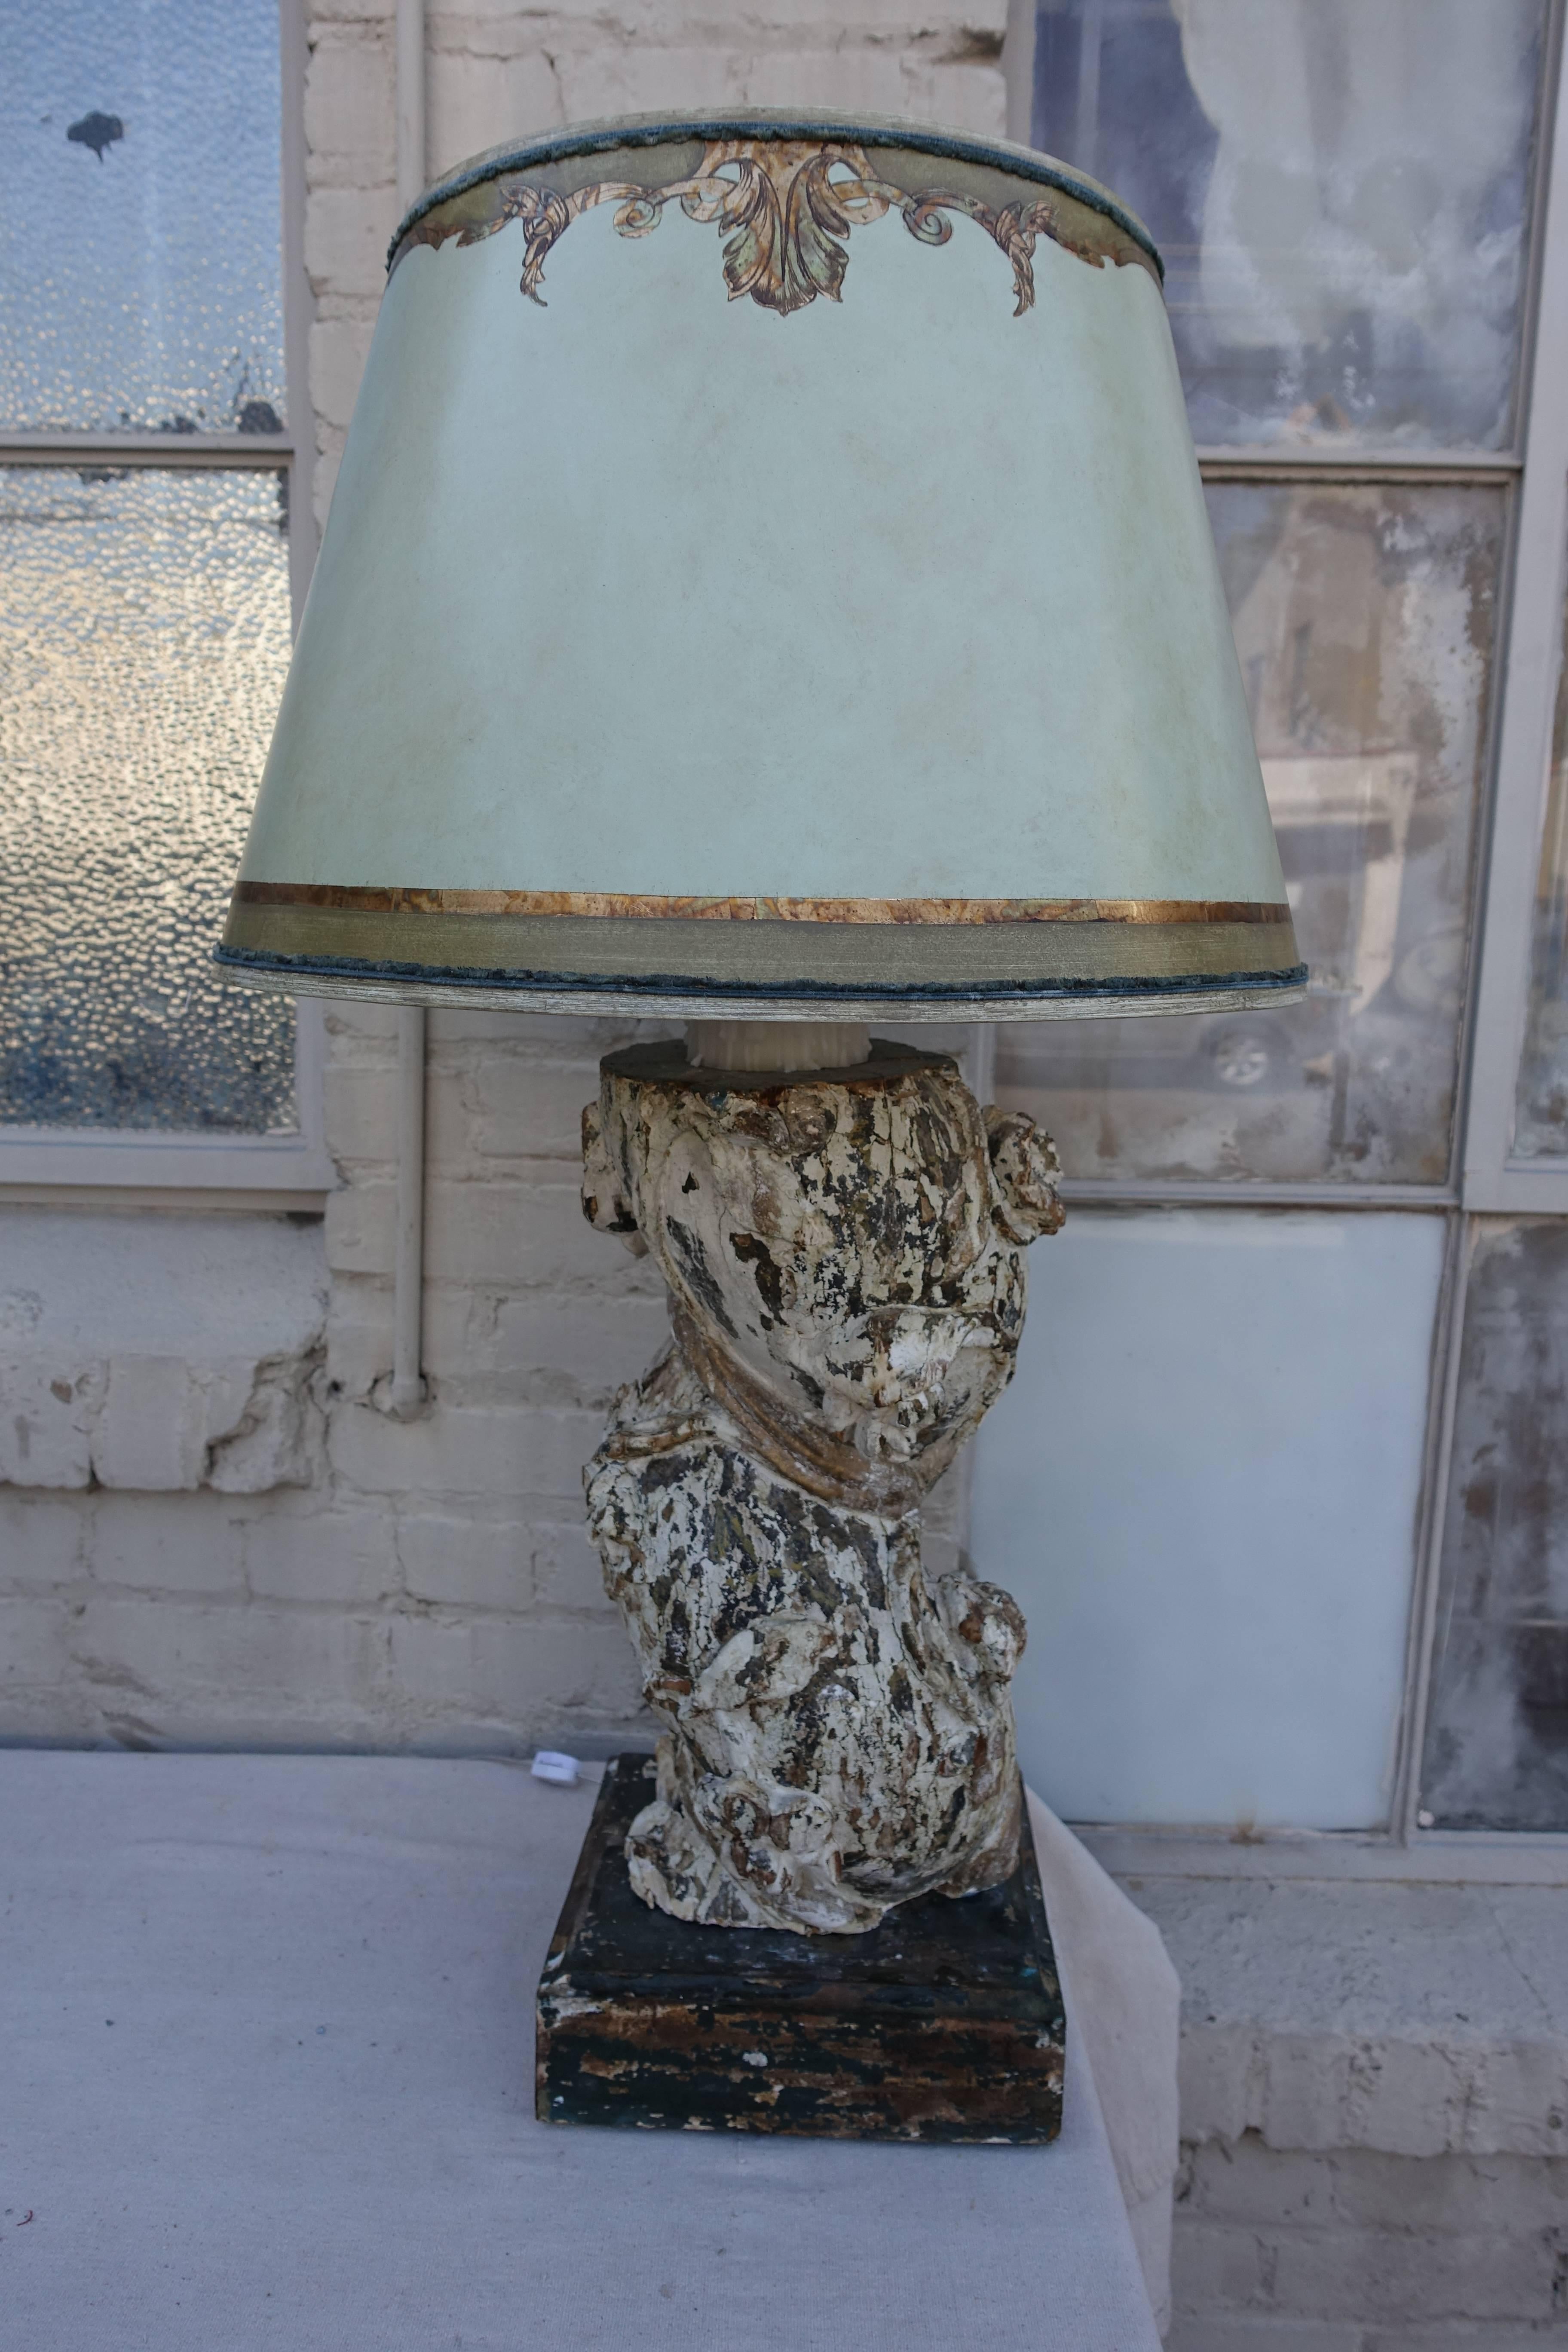 Pair of 19th century Italian column lamps with shades. The lamps have been newly wired with wax candles for decoration only. The lamps are crowned with hand-painted parchment shades with hand-painted gold detailing.